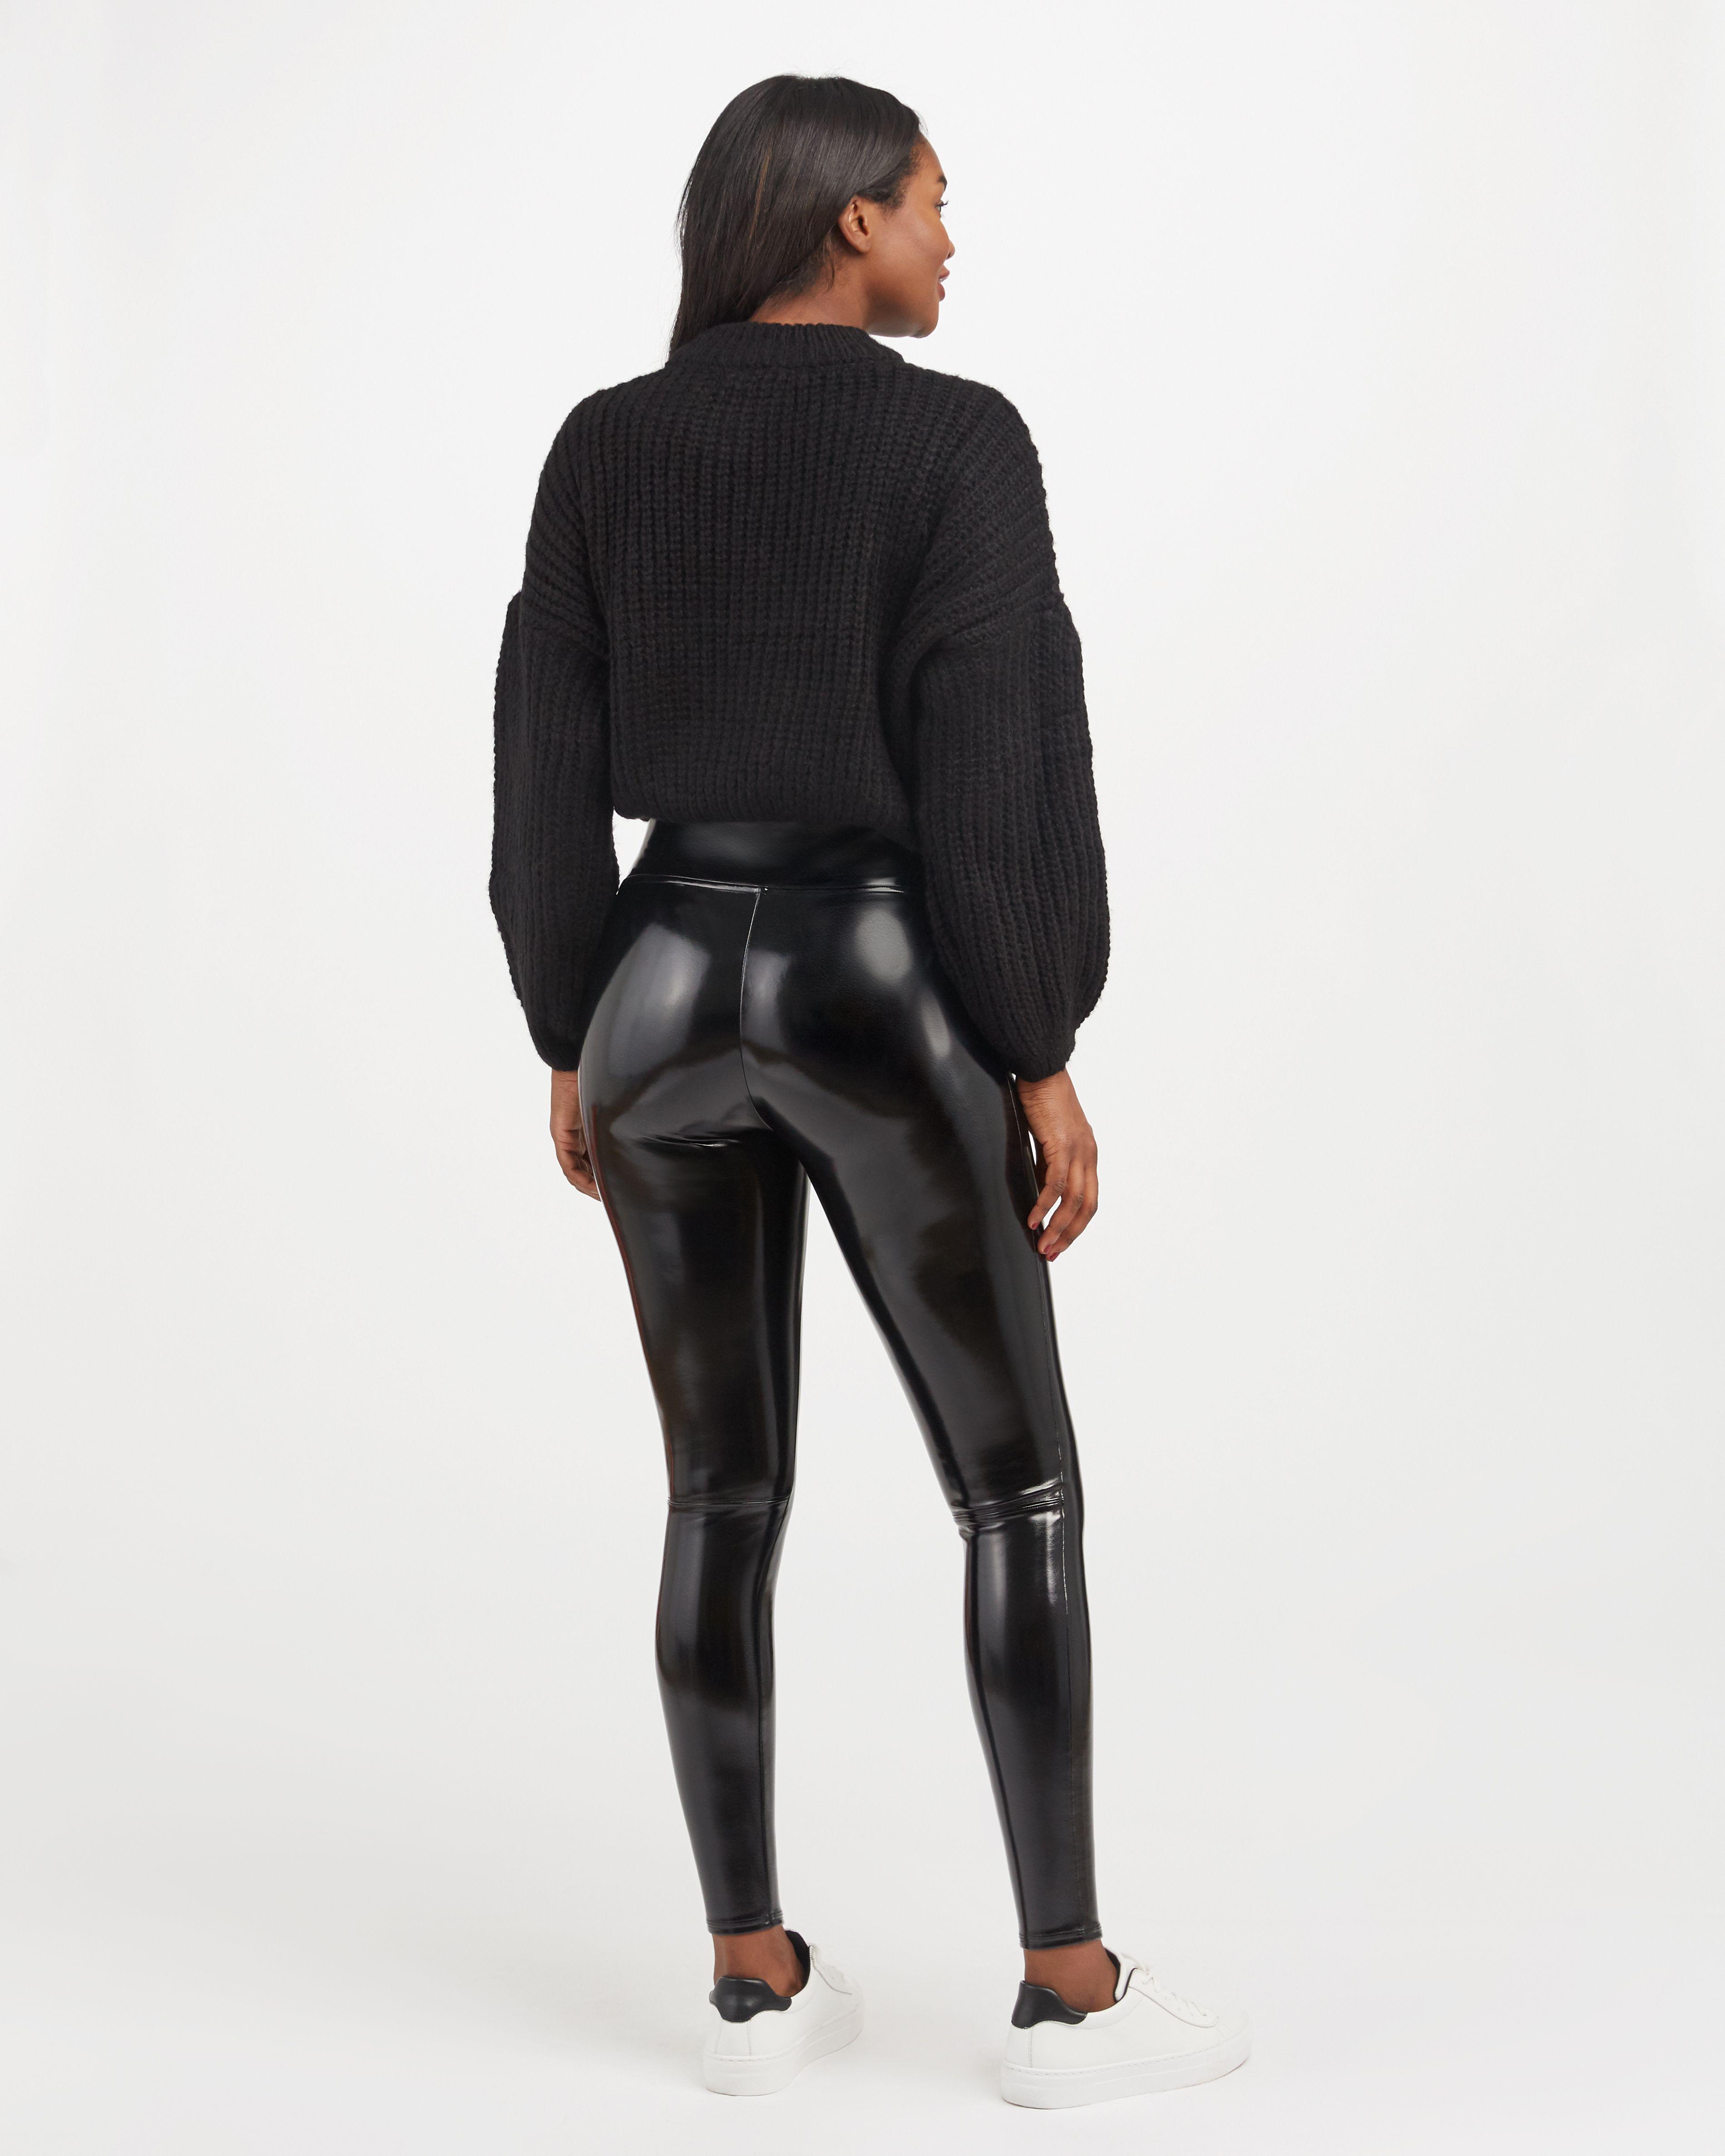 Spanx leggings - 3 Editors review Spanx leggings, with pictures